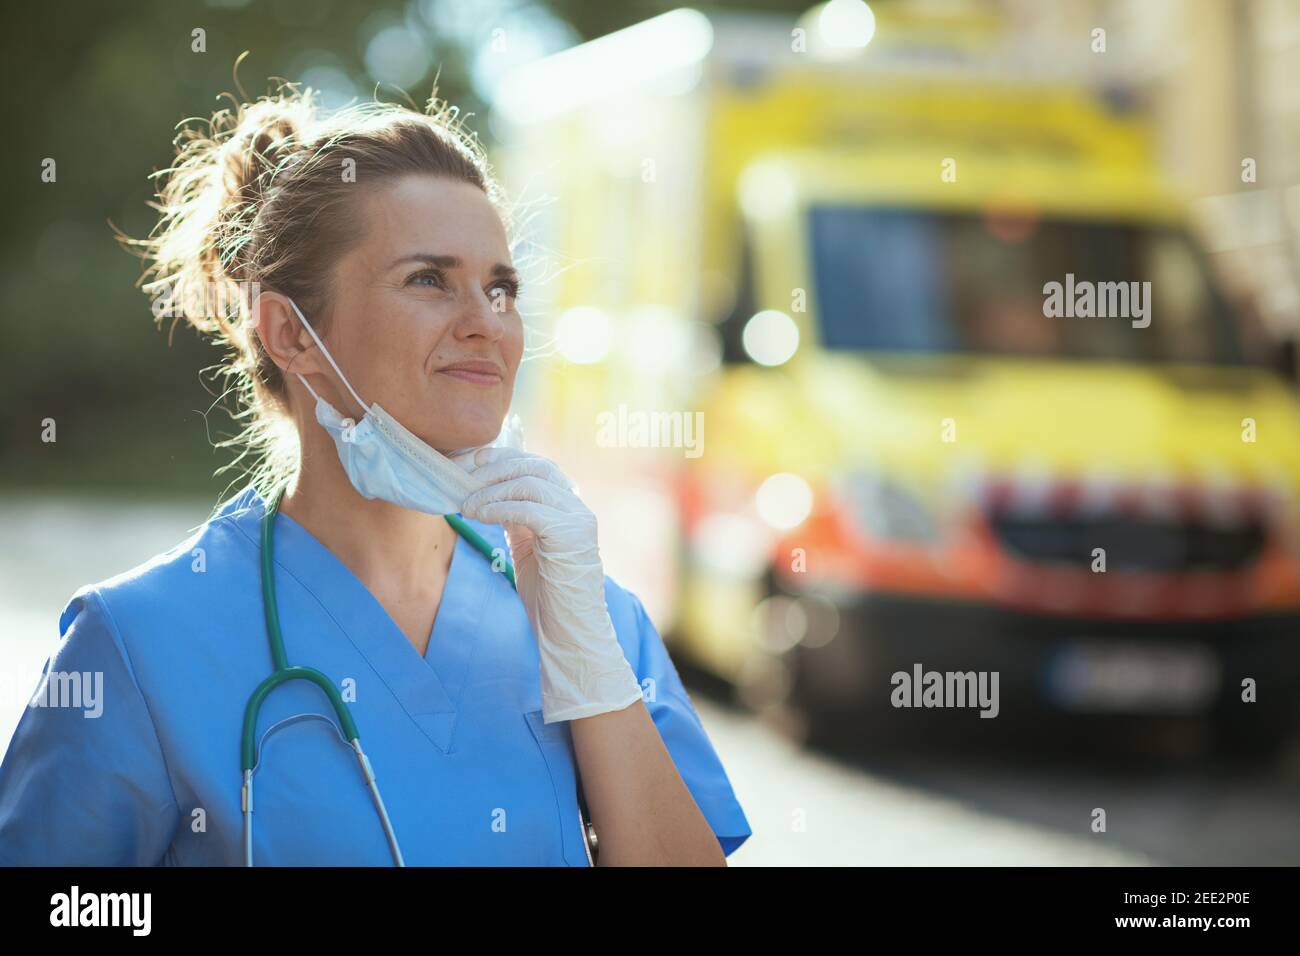 covid-19 pandemic. smiling modern medical doctor woman in scrubs with stethoscope and medical mask breathing outdoors near ambulance. Stock Photo